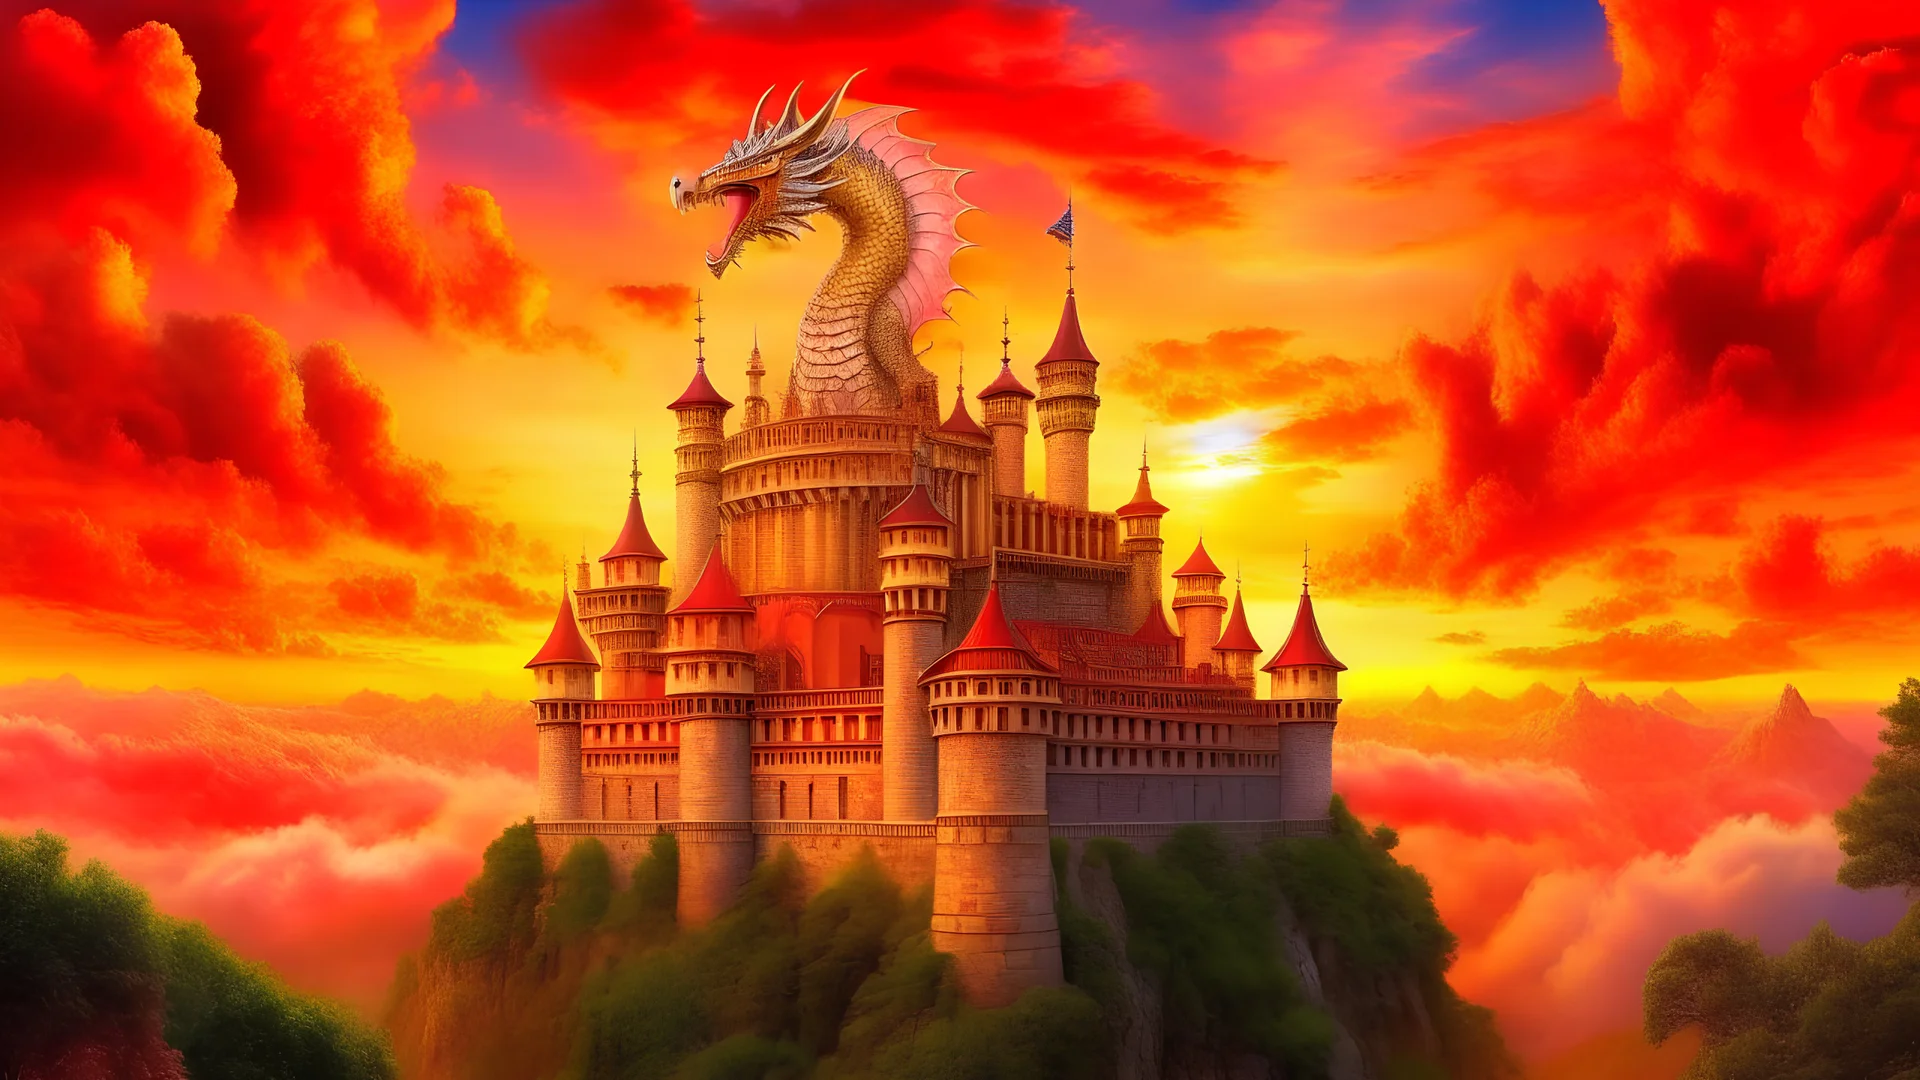 beautiful white, silver, and gold castle sitting on (((sunset colored clouds))), with dragons flying around the castle and the (((beautiful sunset sky))) has a bright shining color